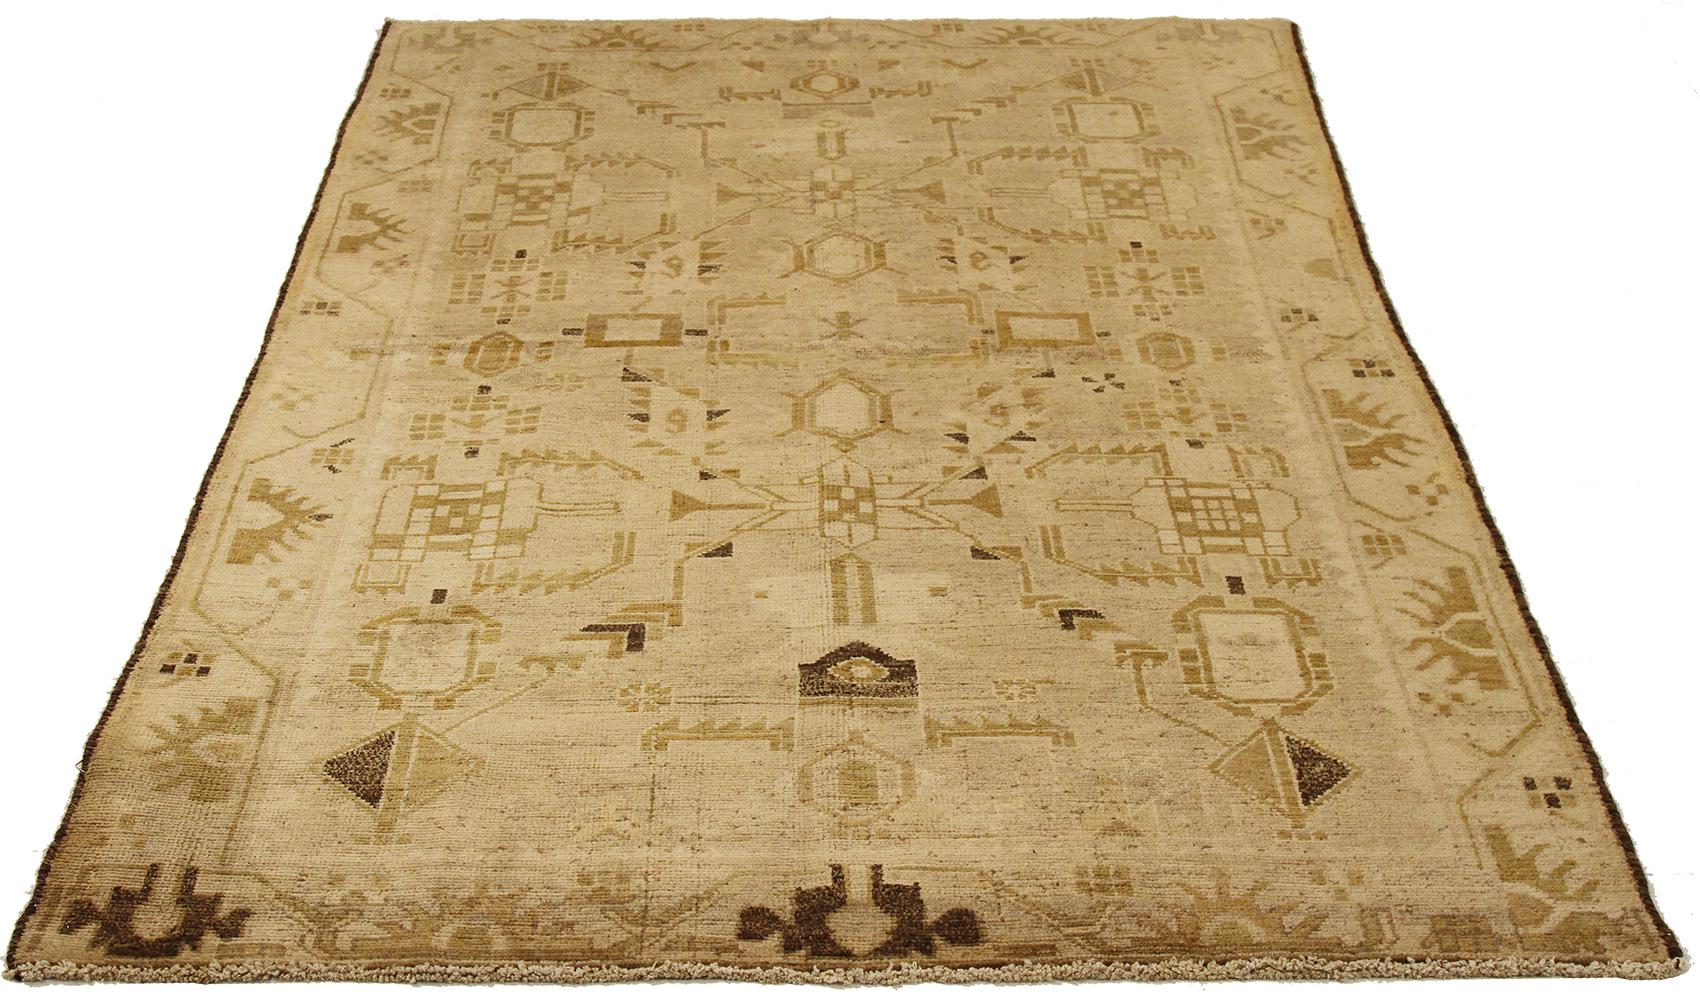 Antique Persian runner rug handwoven from the finest sheep’s wool and colored with all-natural vegetable dyes that are safe for humans and pets. It’s a traditional Malayer design featuring brown and gold geometric details over an ivory field. It’s a